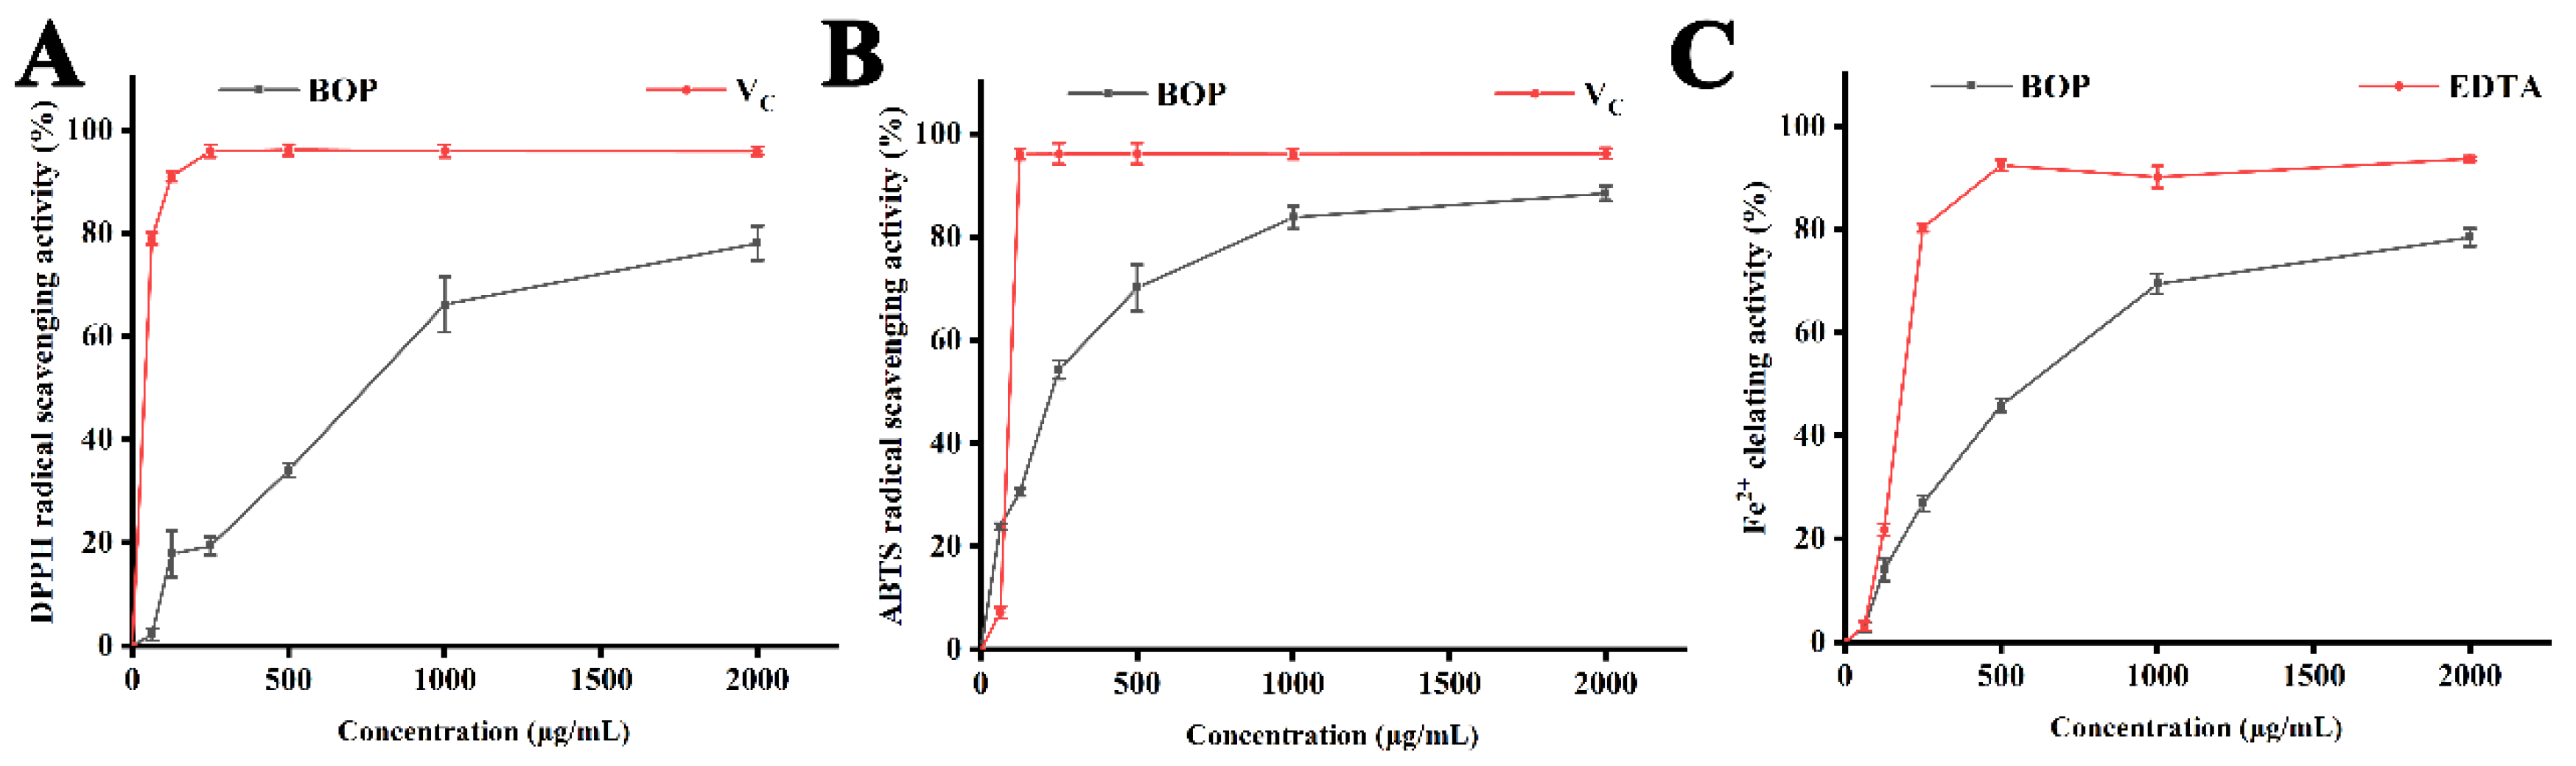 Processes Free Full Text Optimizing The Extraction Of Polysaccharides From Bletilla Ochracea Schltr Using Response Surface Methodology Rsm And Evaluating Their Antioxidant Activity Html